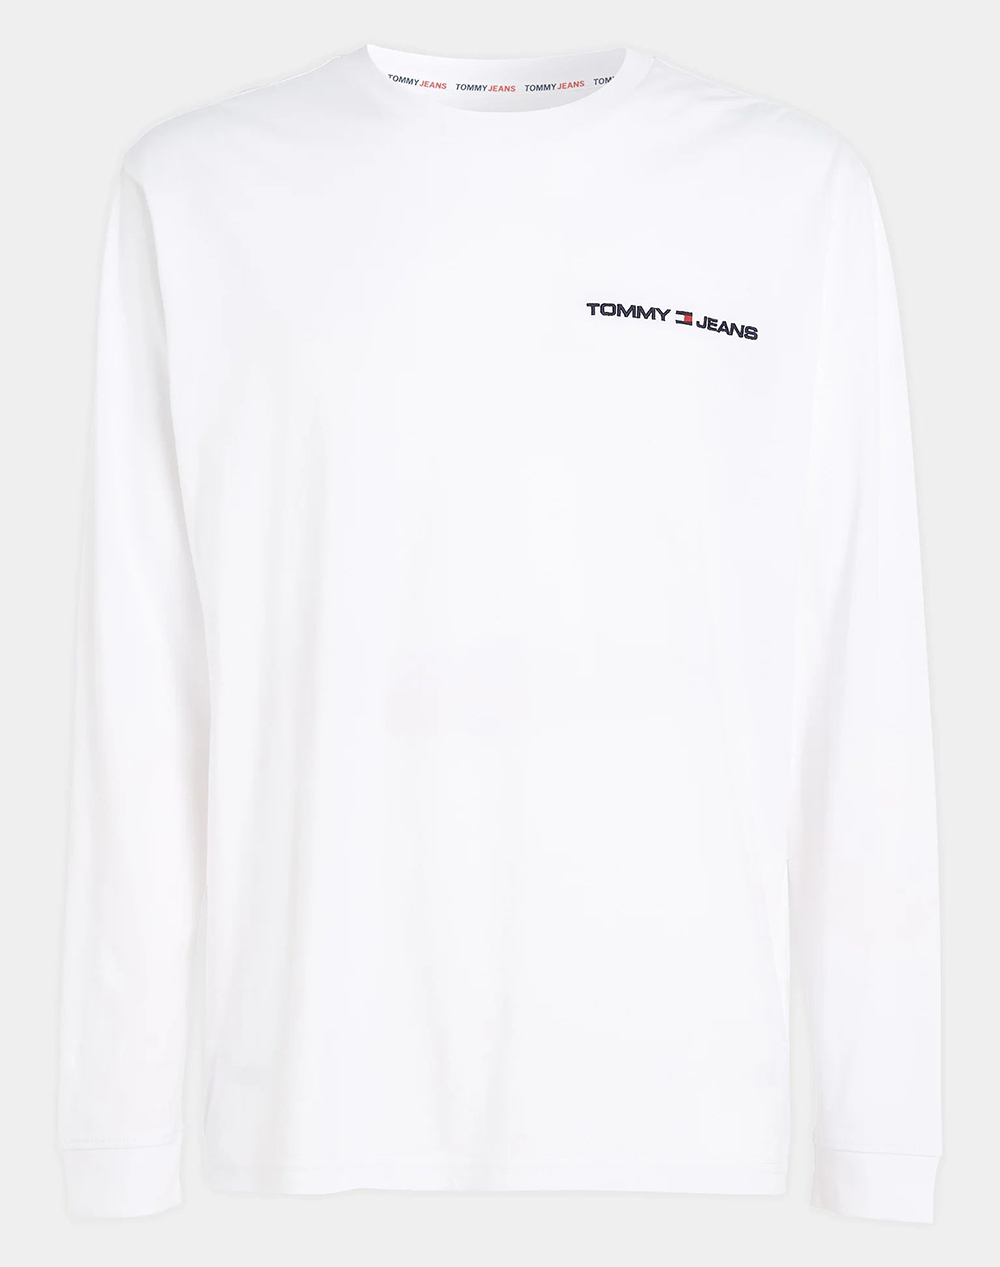 TOMMY JEANS TEE CHEST White CLSC LINEAR - TJM